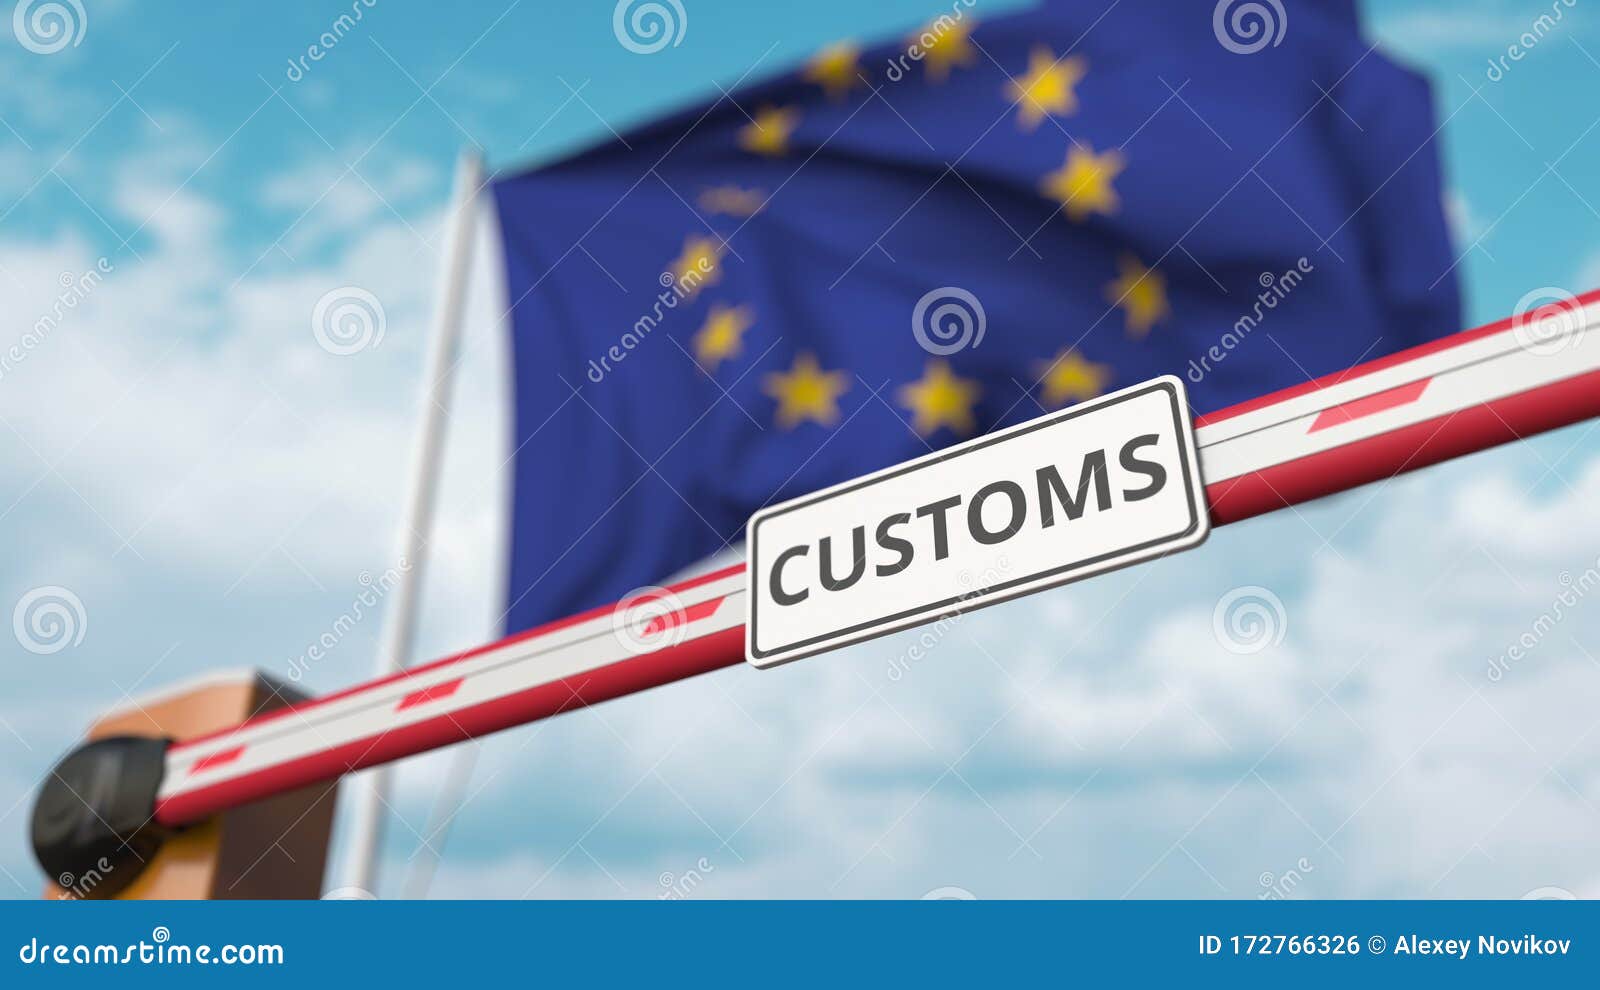 barrier gate with customs sign being closed with flag of the eu as a background. european border closure or protective